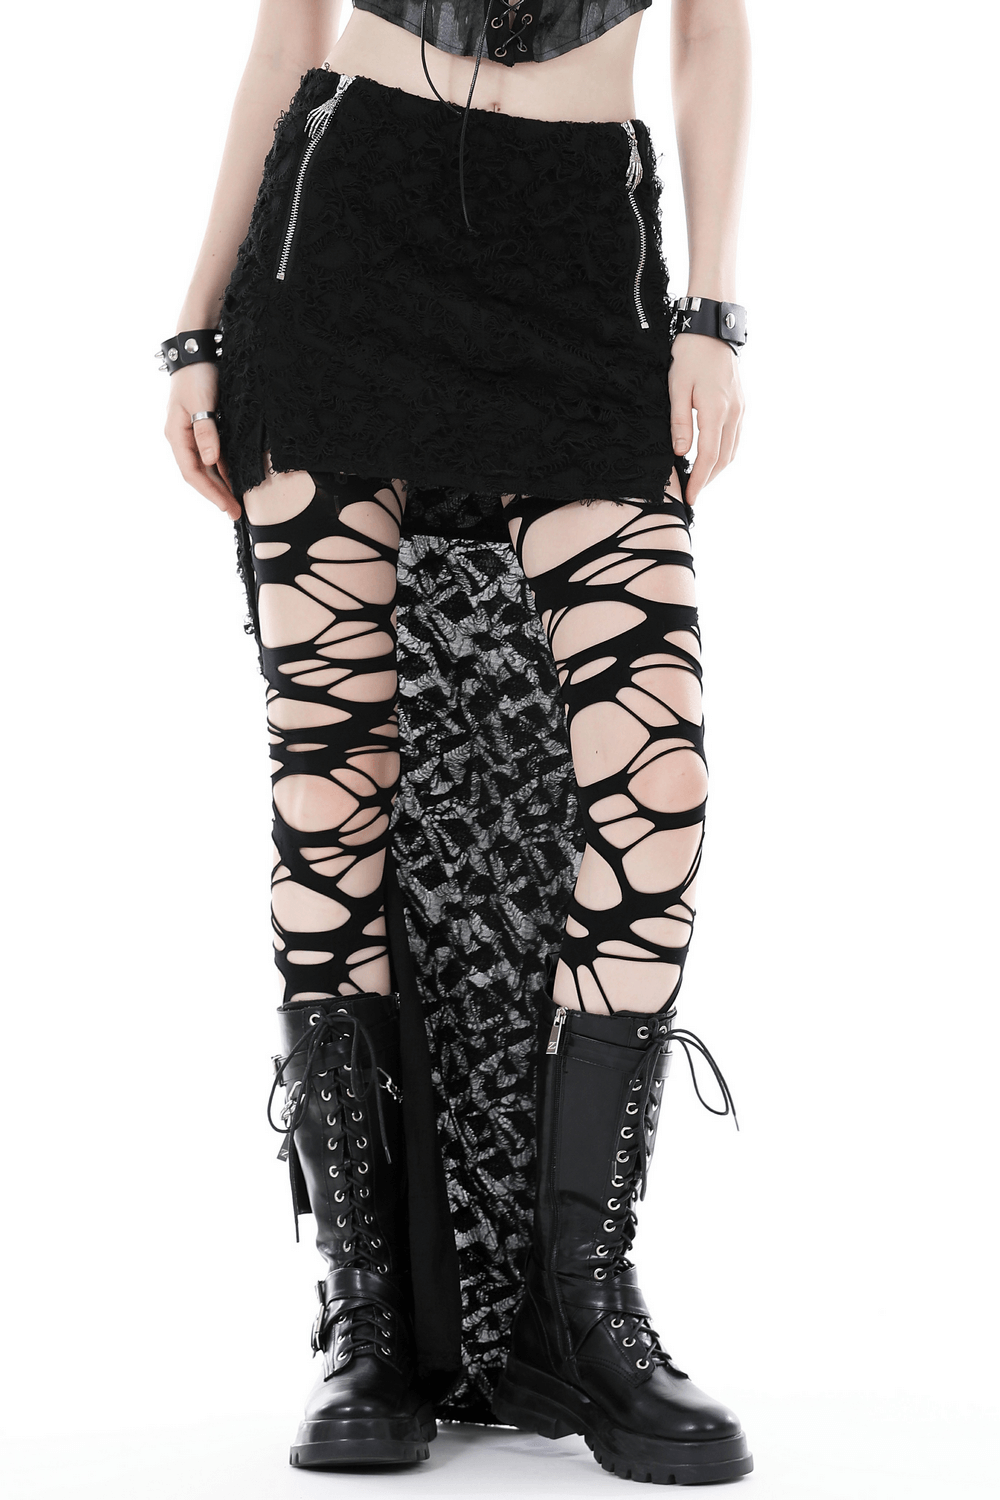 High-Low Lace Skirt with Side Zipper - Dark Gothic Punk